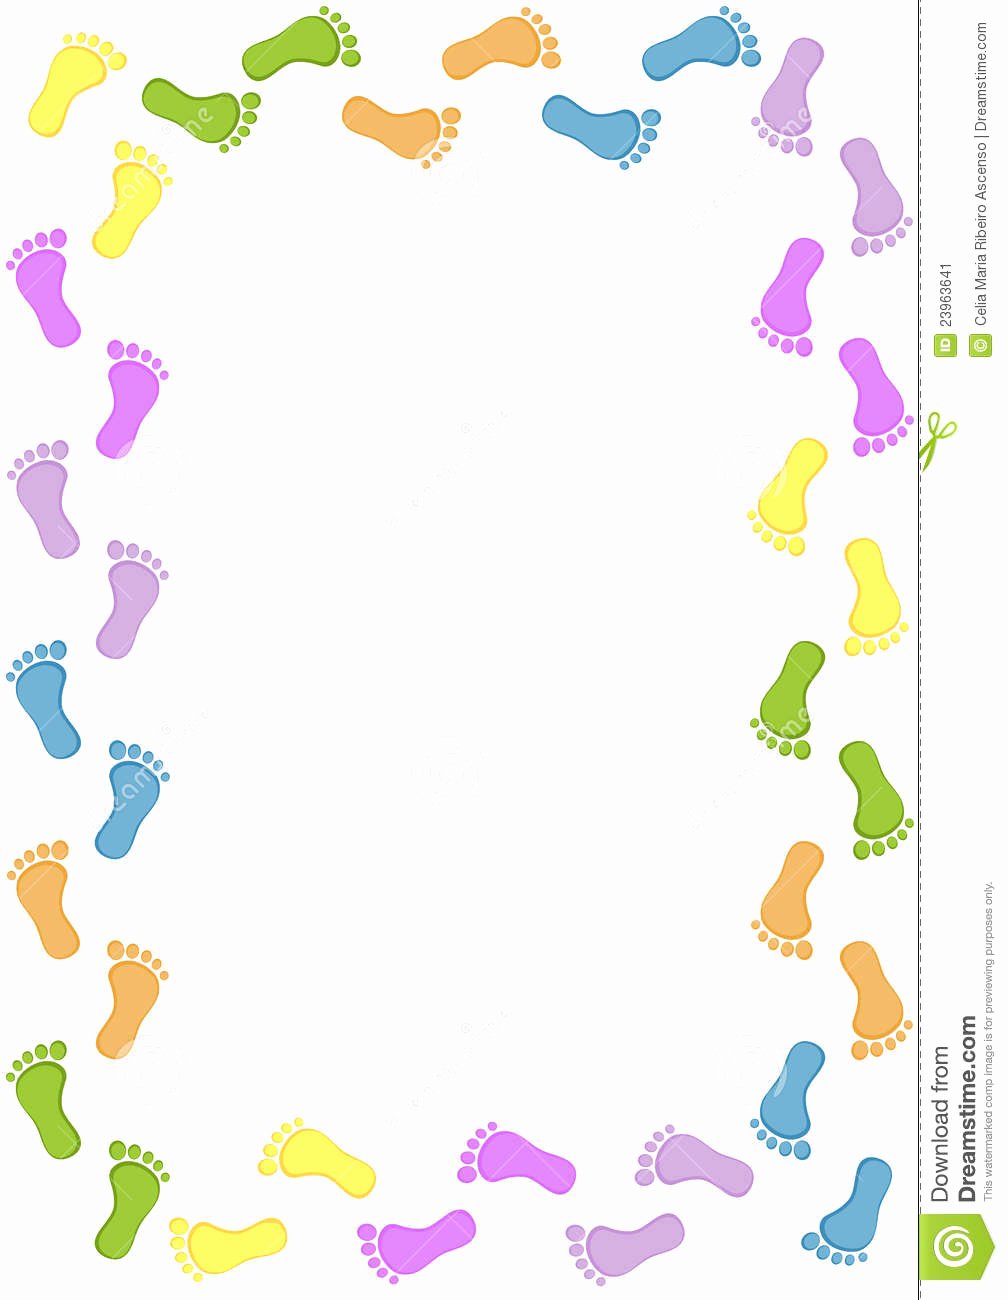 Baby Border for Word Document Beautiful Baby Foot Border Stock Image Illustration Of Colors